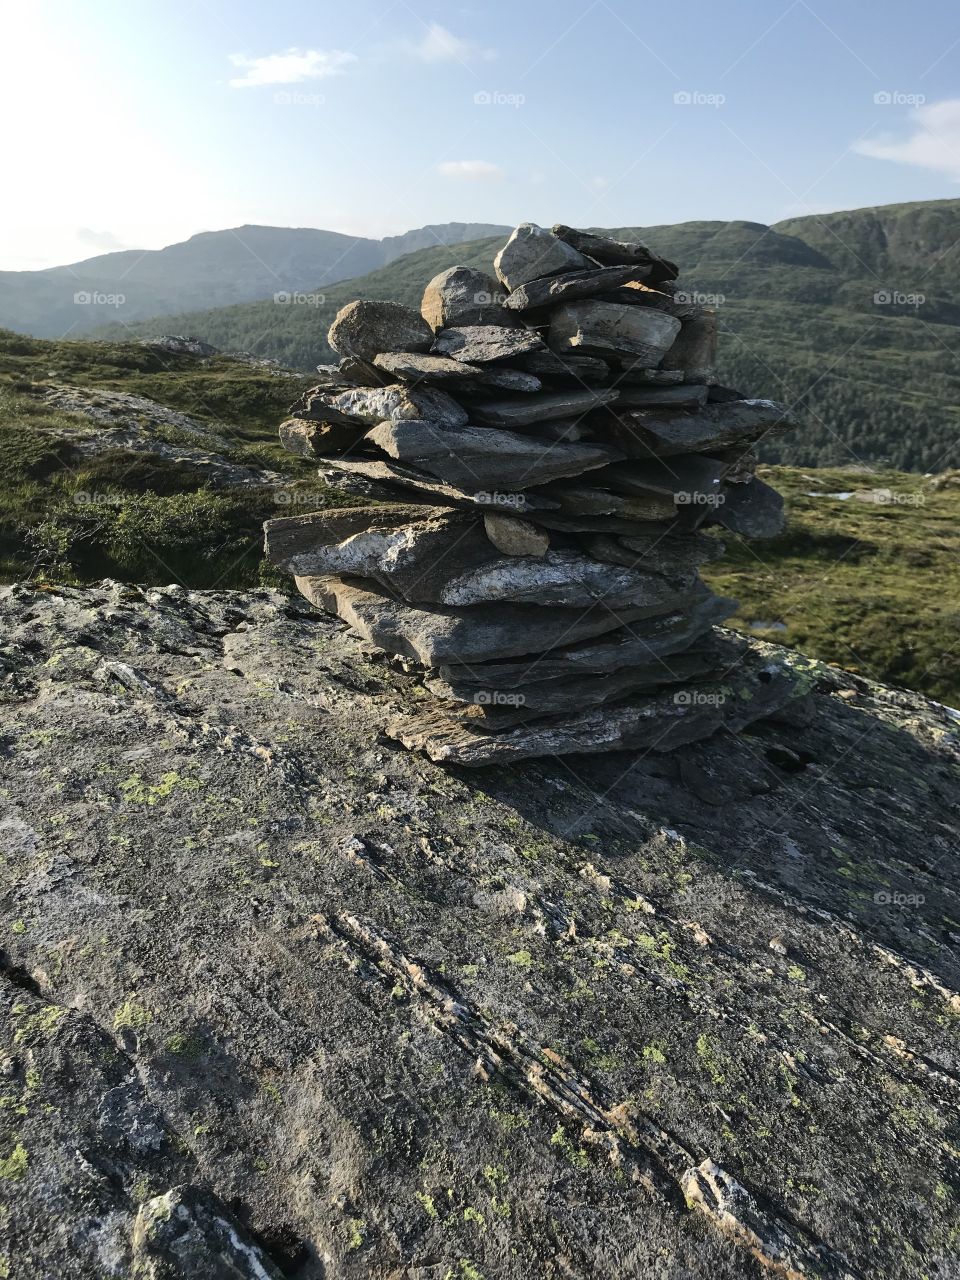 A beautiful pictures from one of the many mountains in Norway. This is a stack of stones built on top of the mountain. It’s really common finding these around in the mountains in Norway.